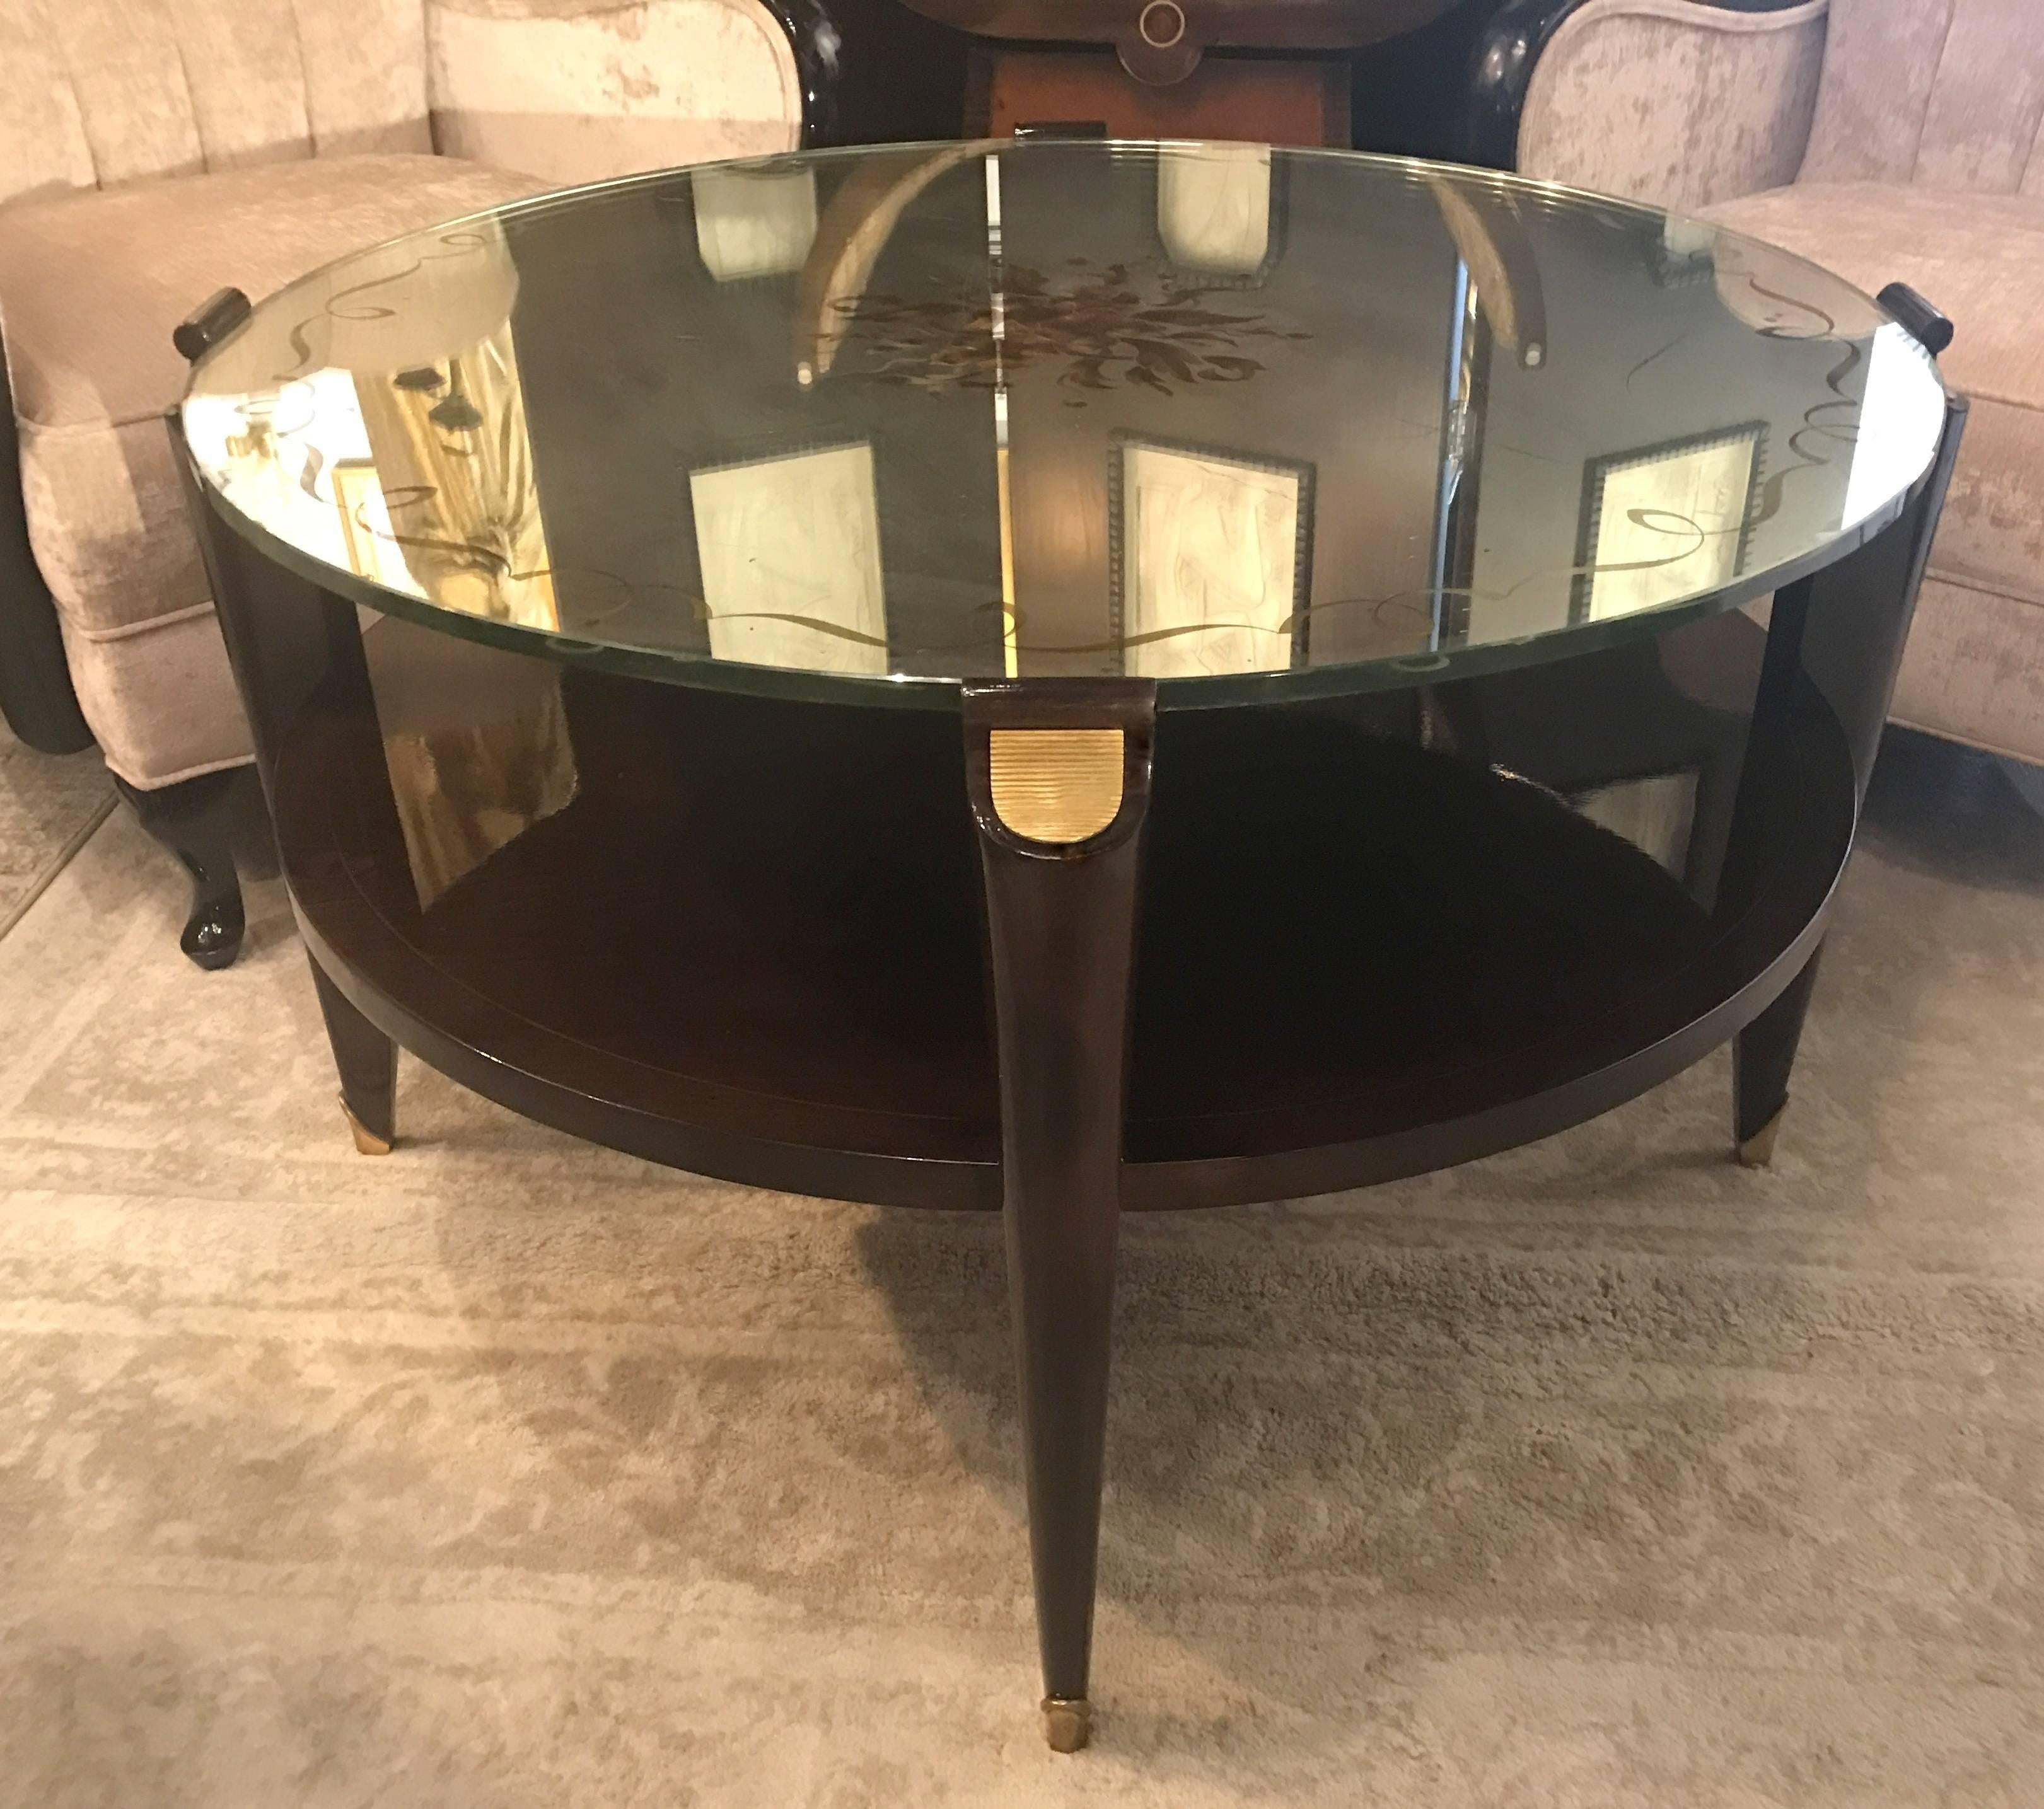 Mid-20th Century French Art Deco Coffee Table in Exotic Wood with Églomisé Mirror Top For Sale